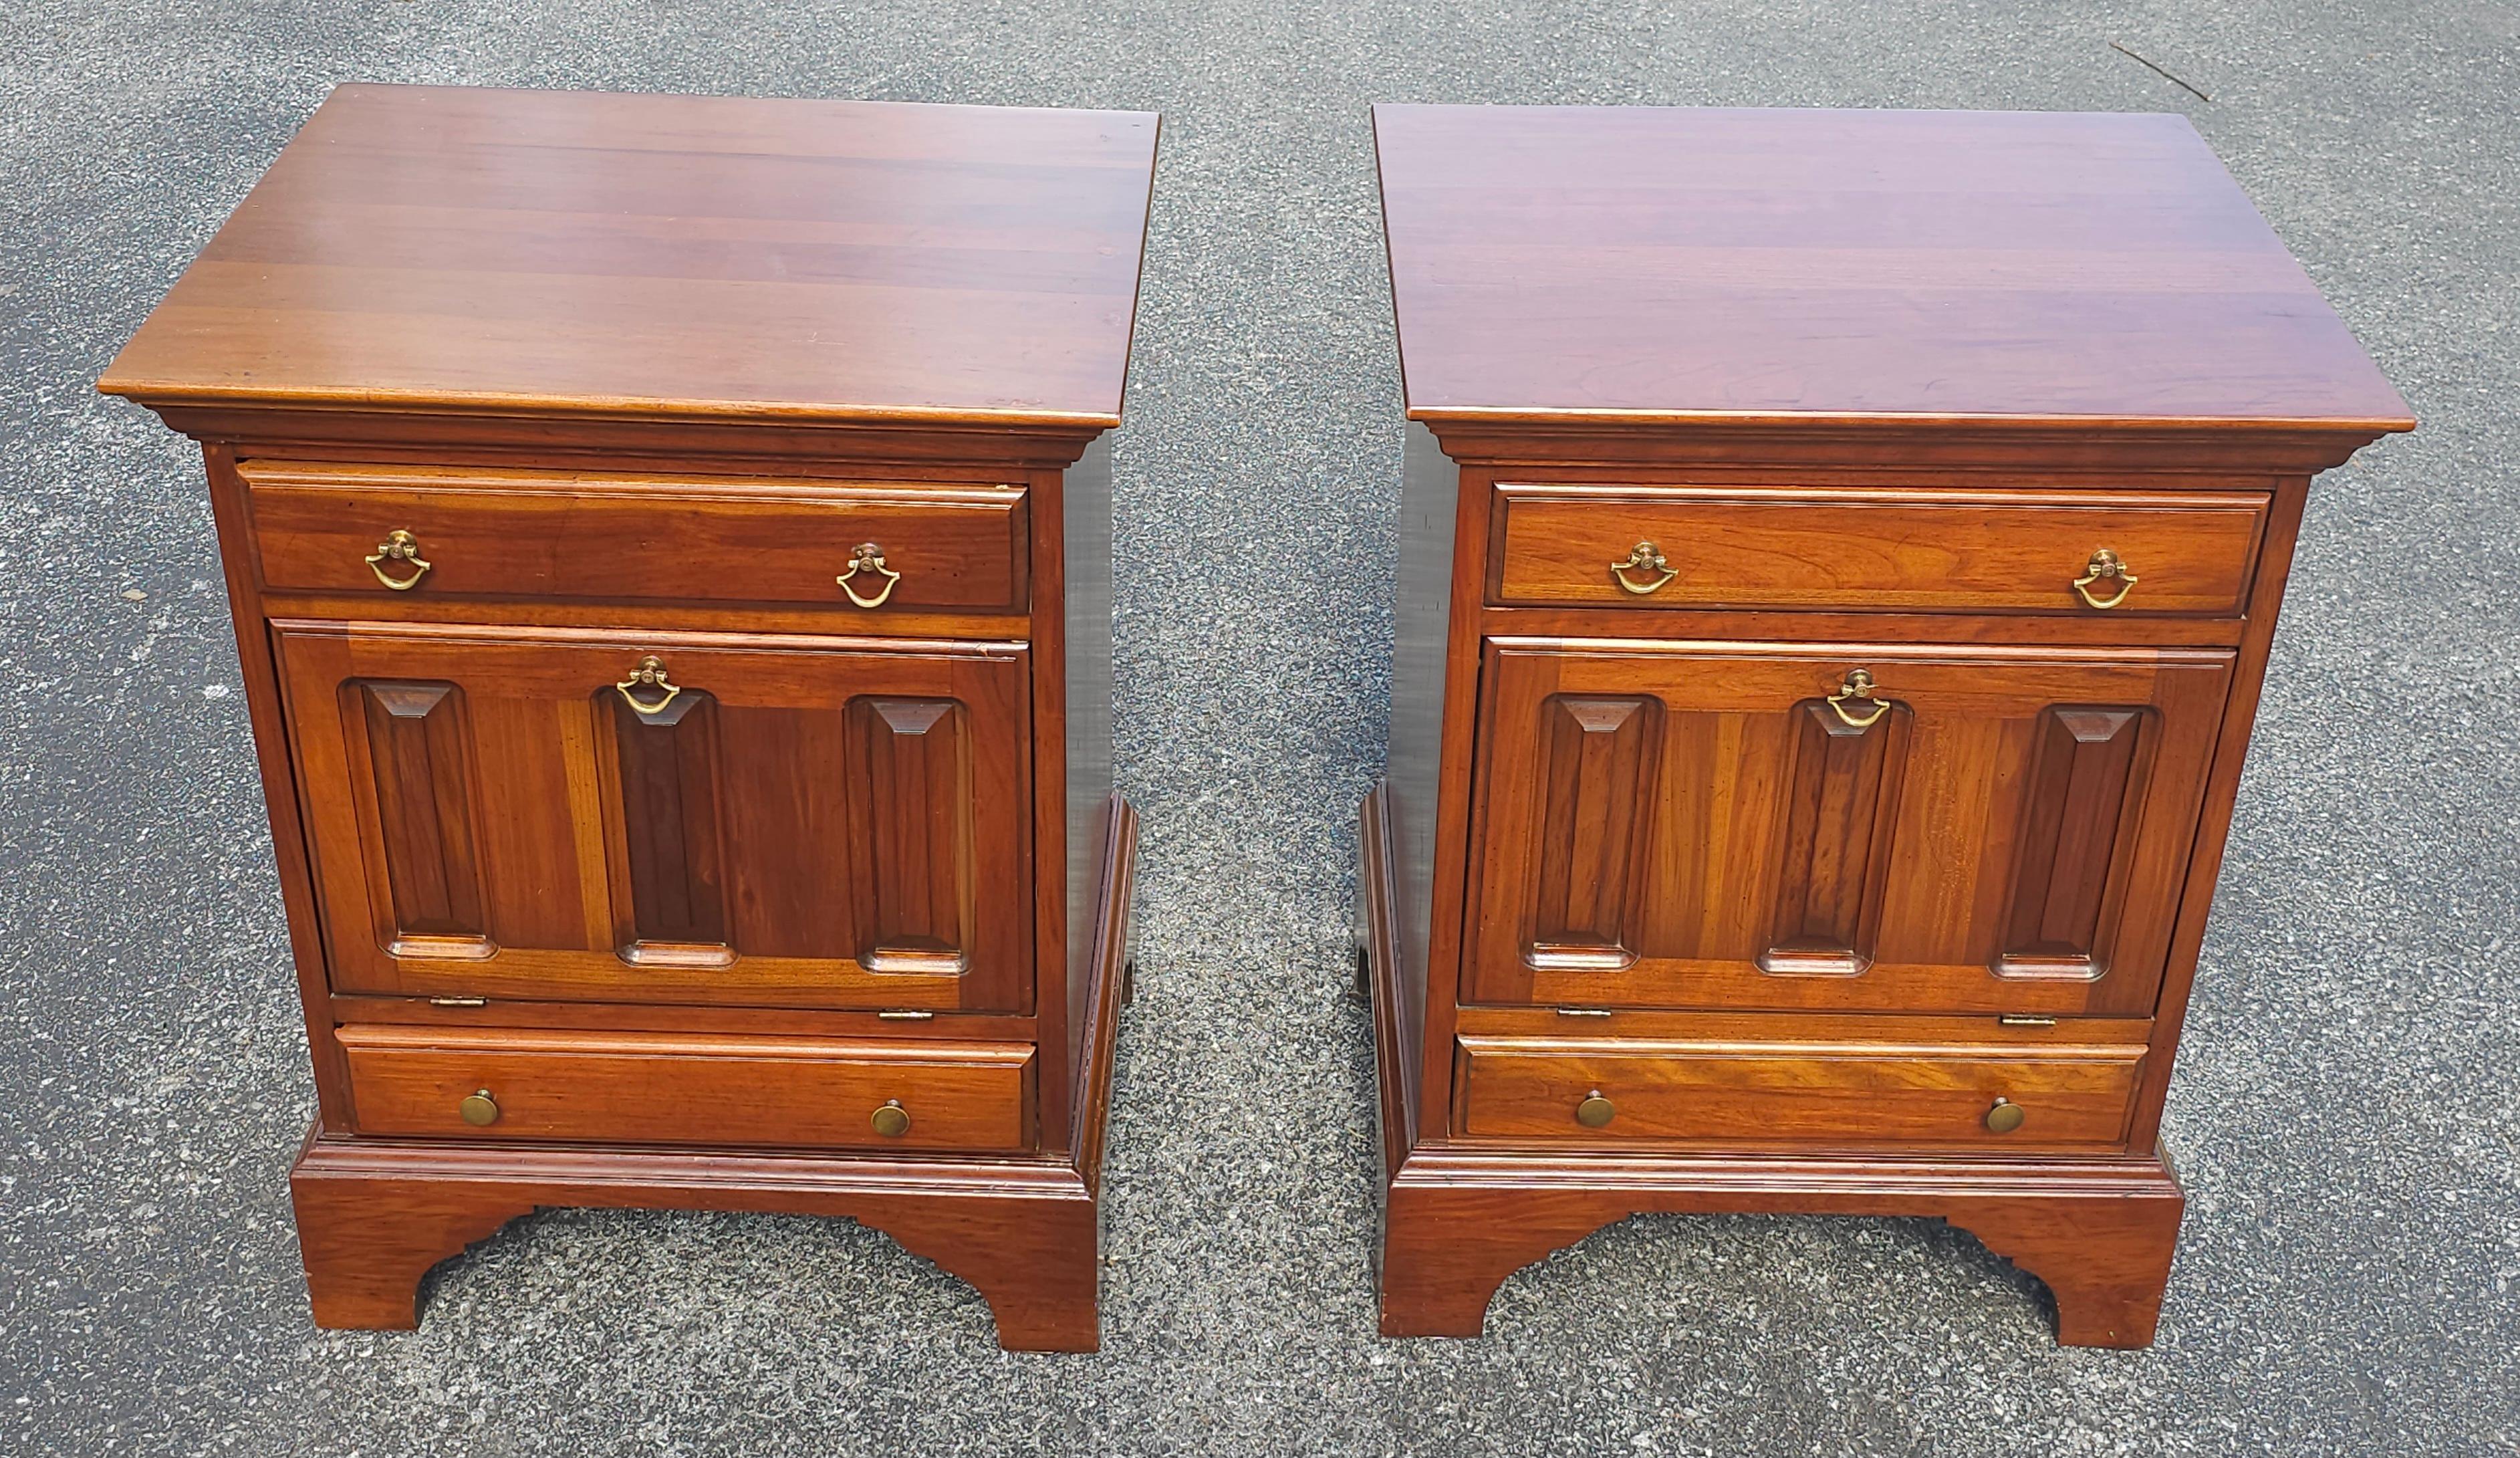 20th Century David Cabinet Cherry 2-Drawer a Abattant Door Bedside Cabinets Pair For Sale 7